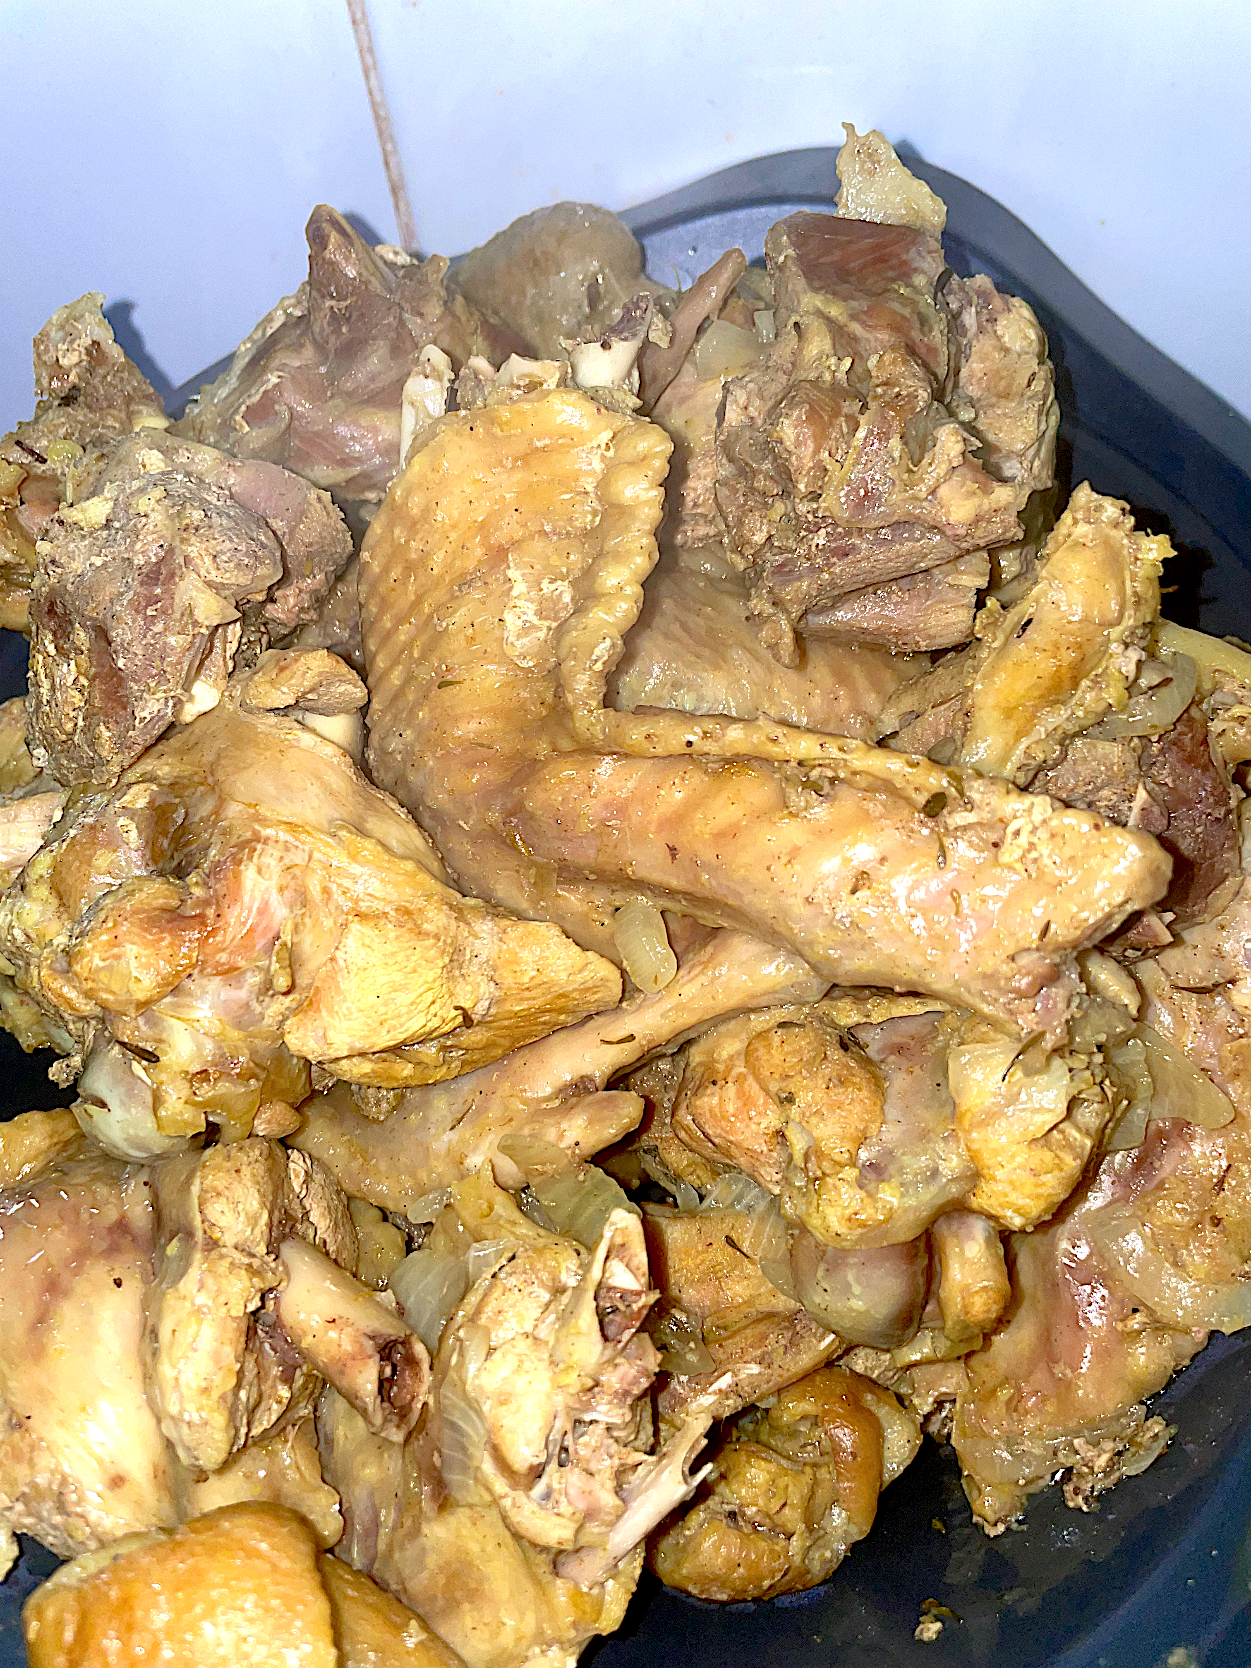 Boiled Chicken and Turkey